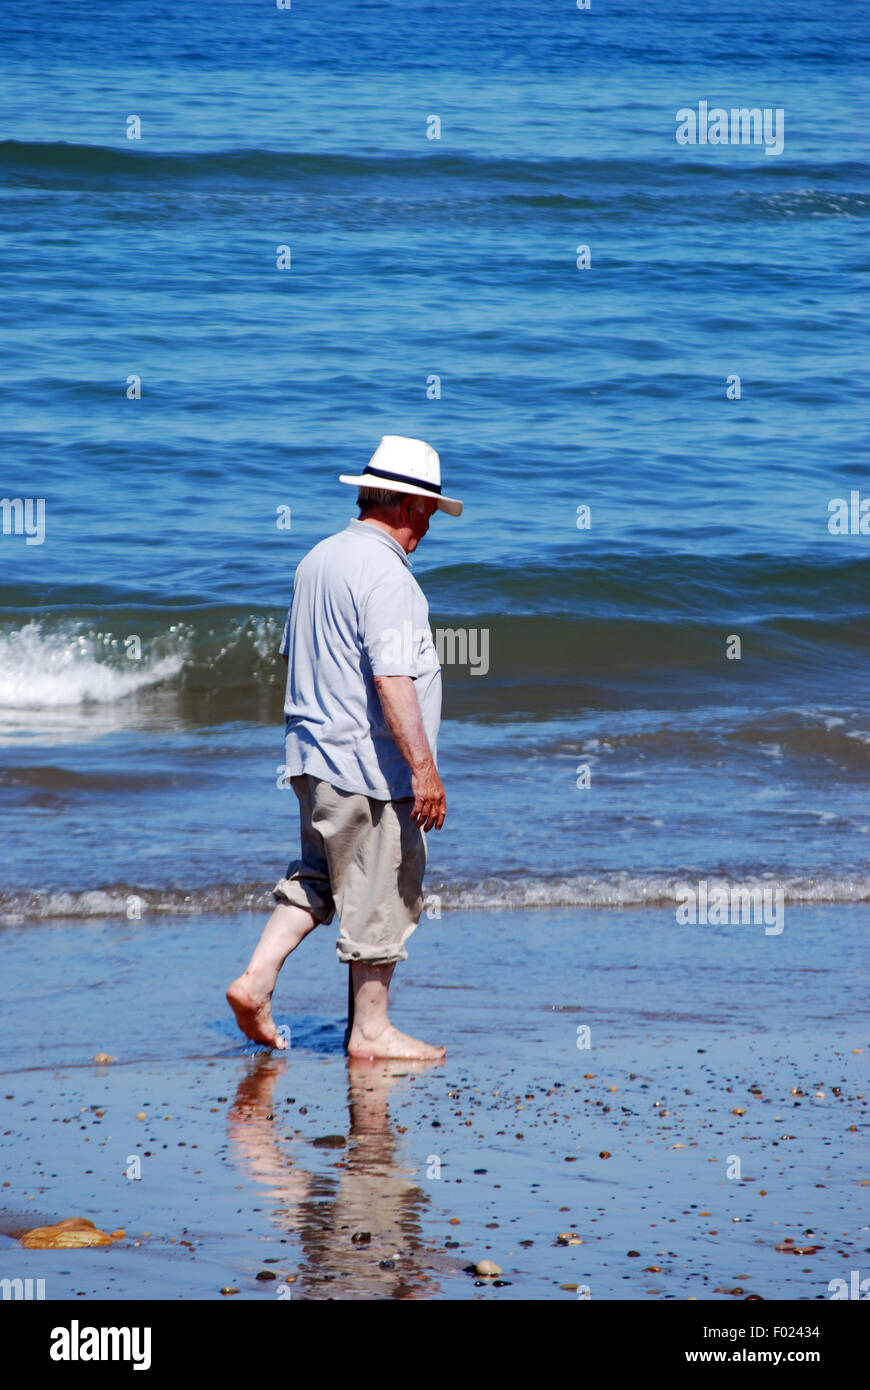 A stroll along the water's edge on a warm and sunny day Stock Photo